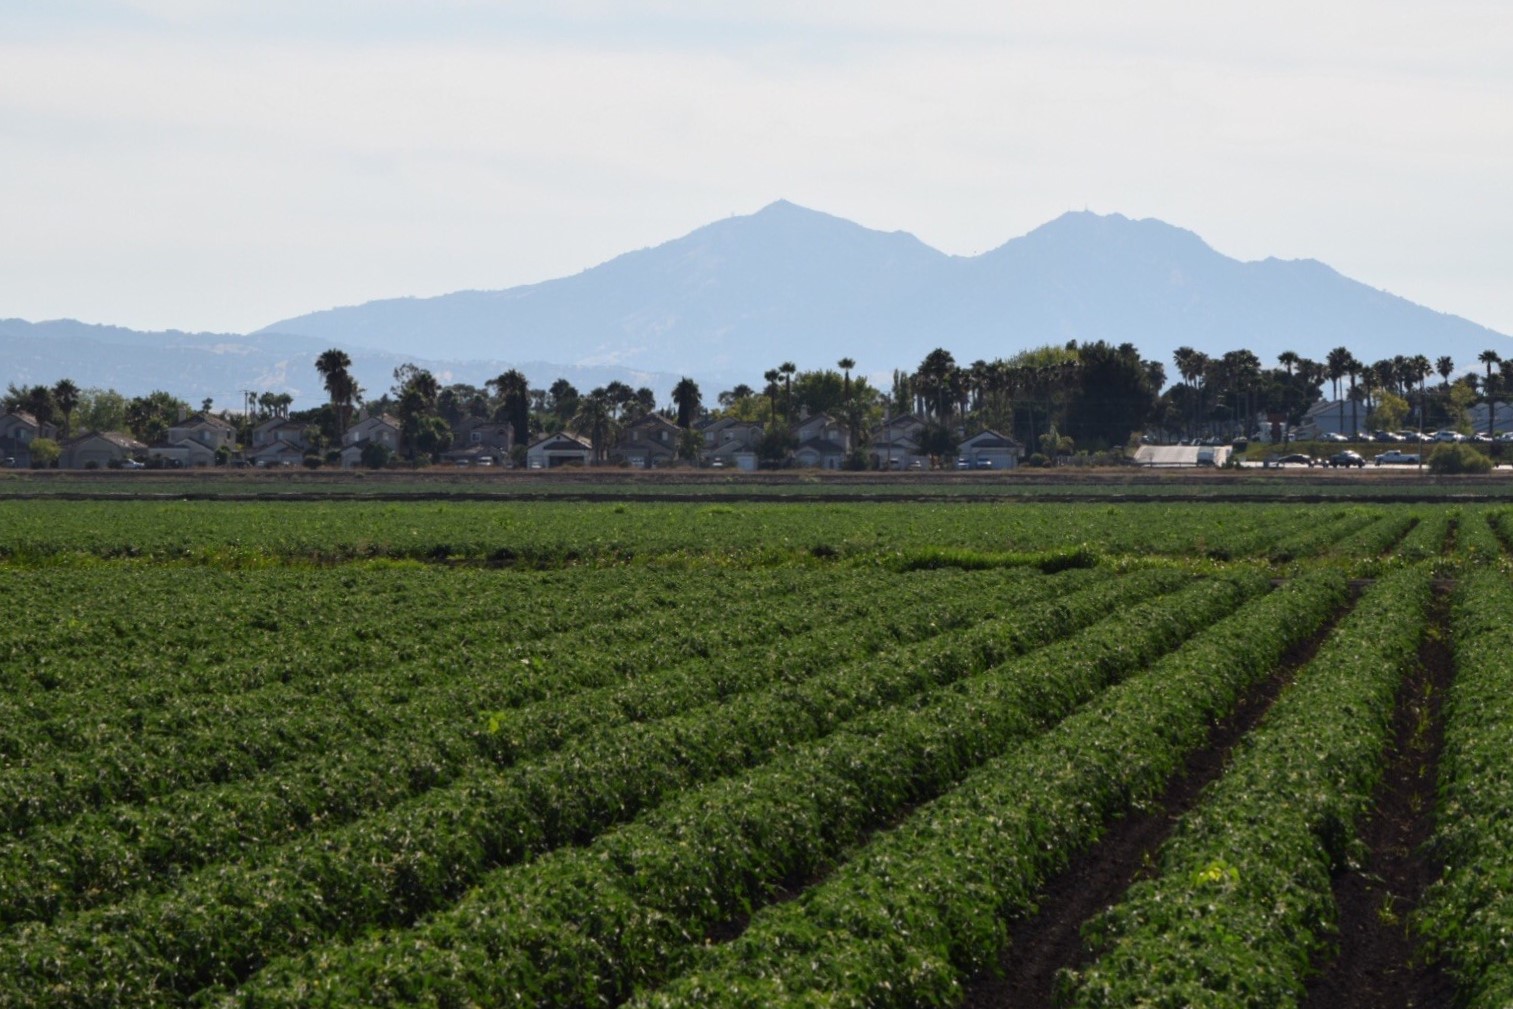 Rows of crops in the foreground and Mt Diablo in the background